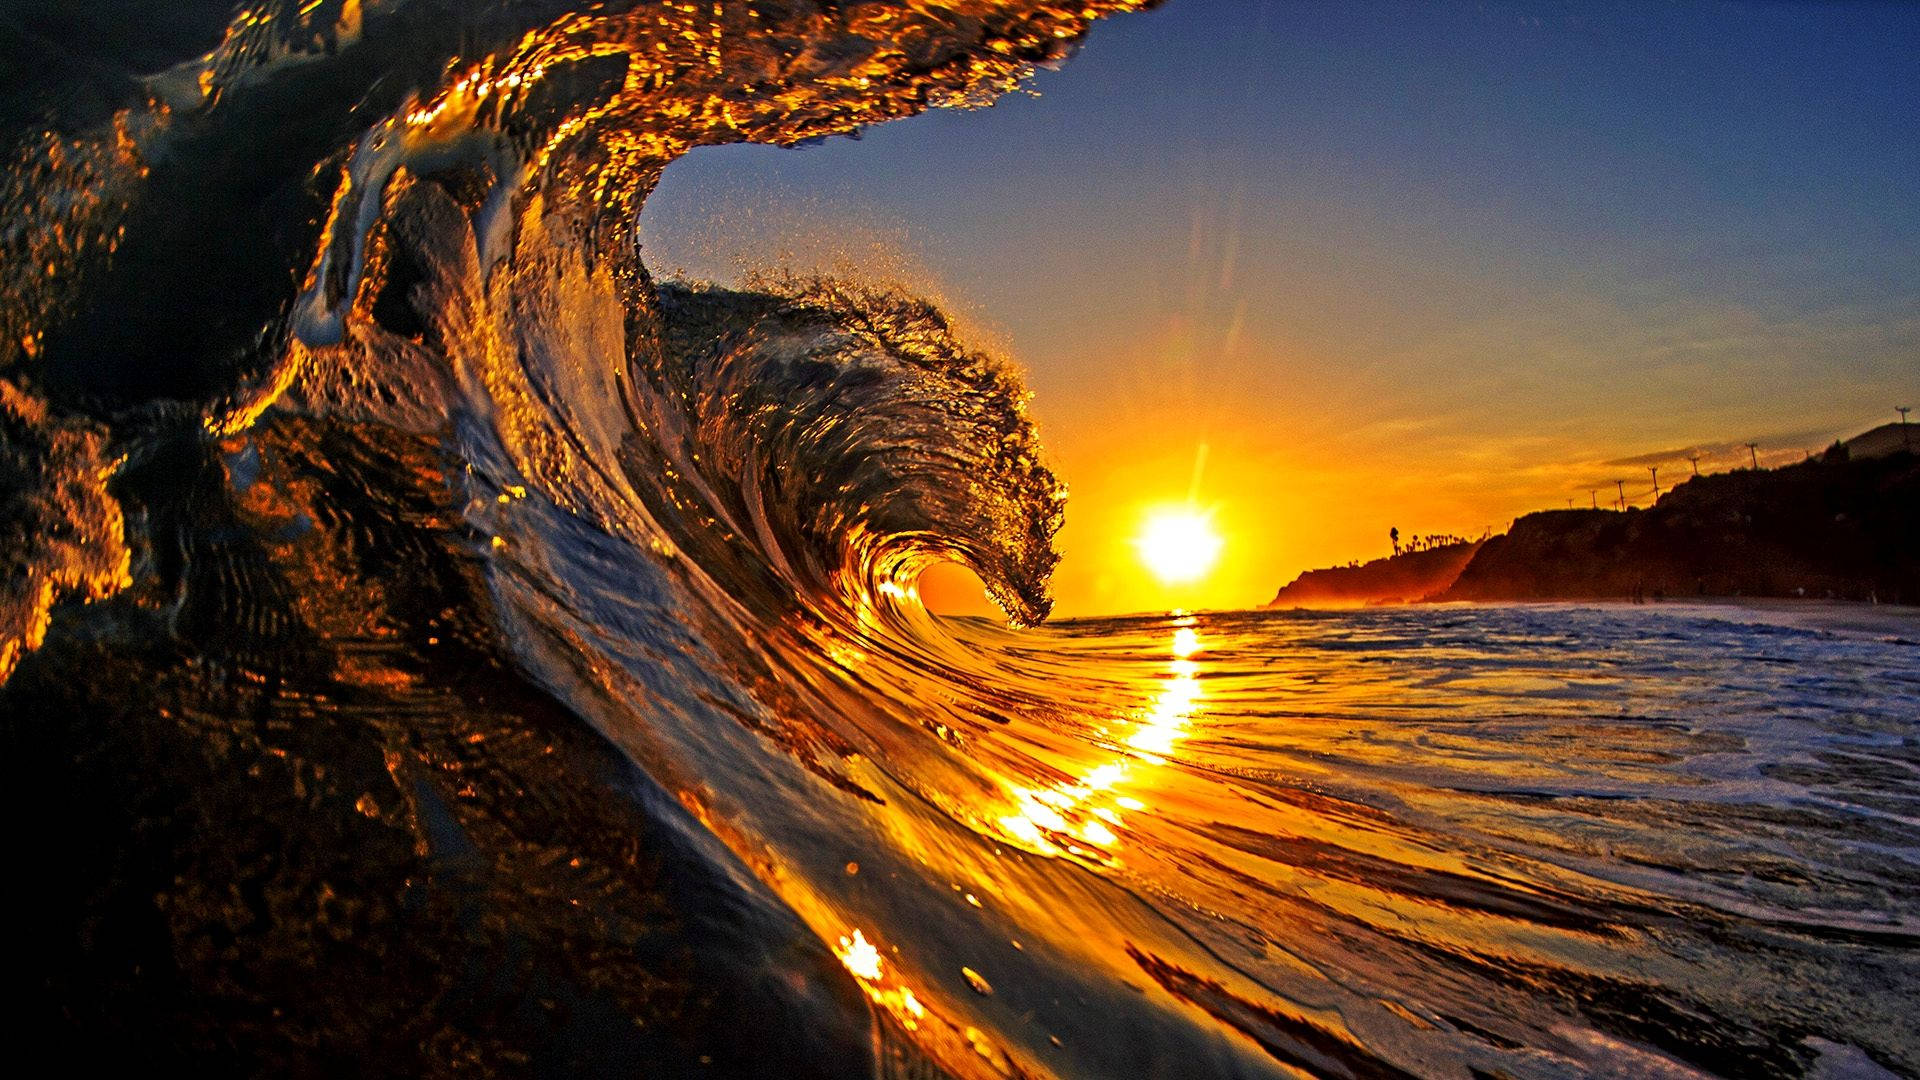 Take a moment to appreciate the beauty of a stunning sunset over the waves. Wallpaper